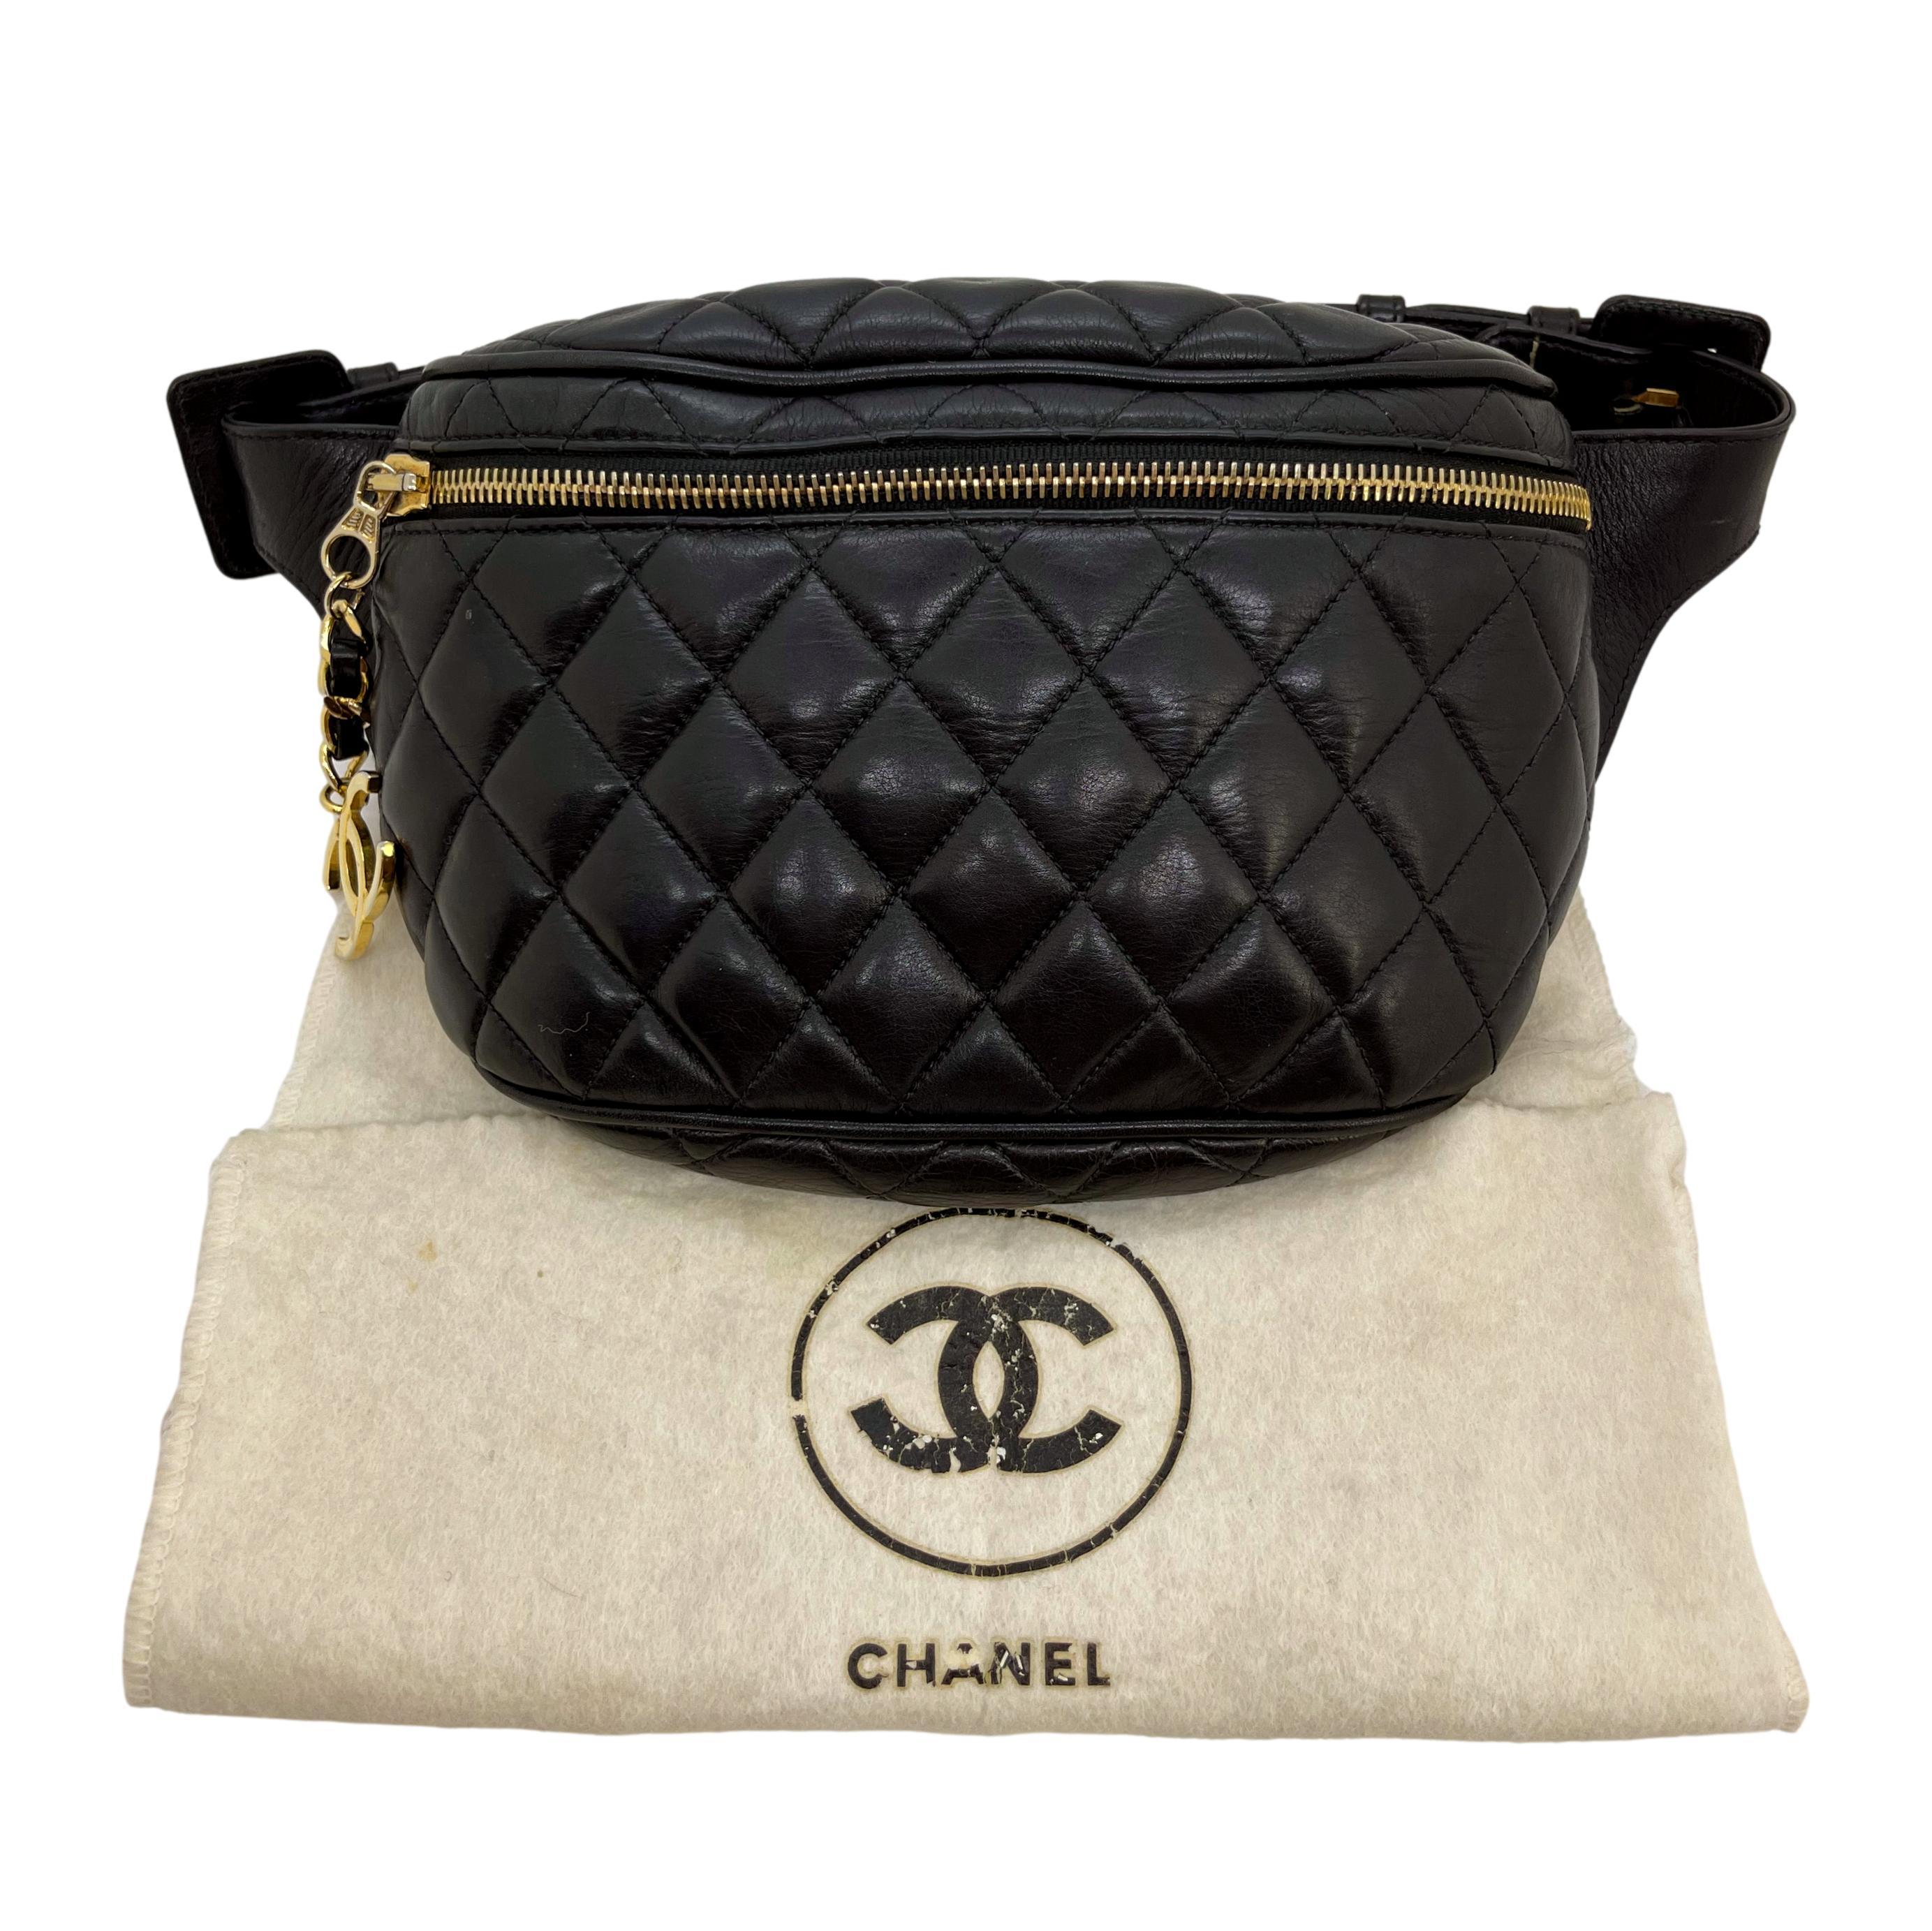 Black Chanel Quilted Lambskin Waist Belt Bum Bag with Gold Hardware, 1985.